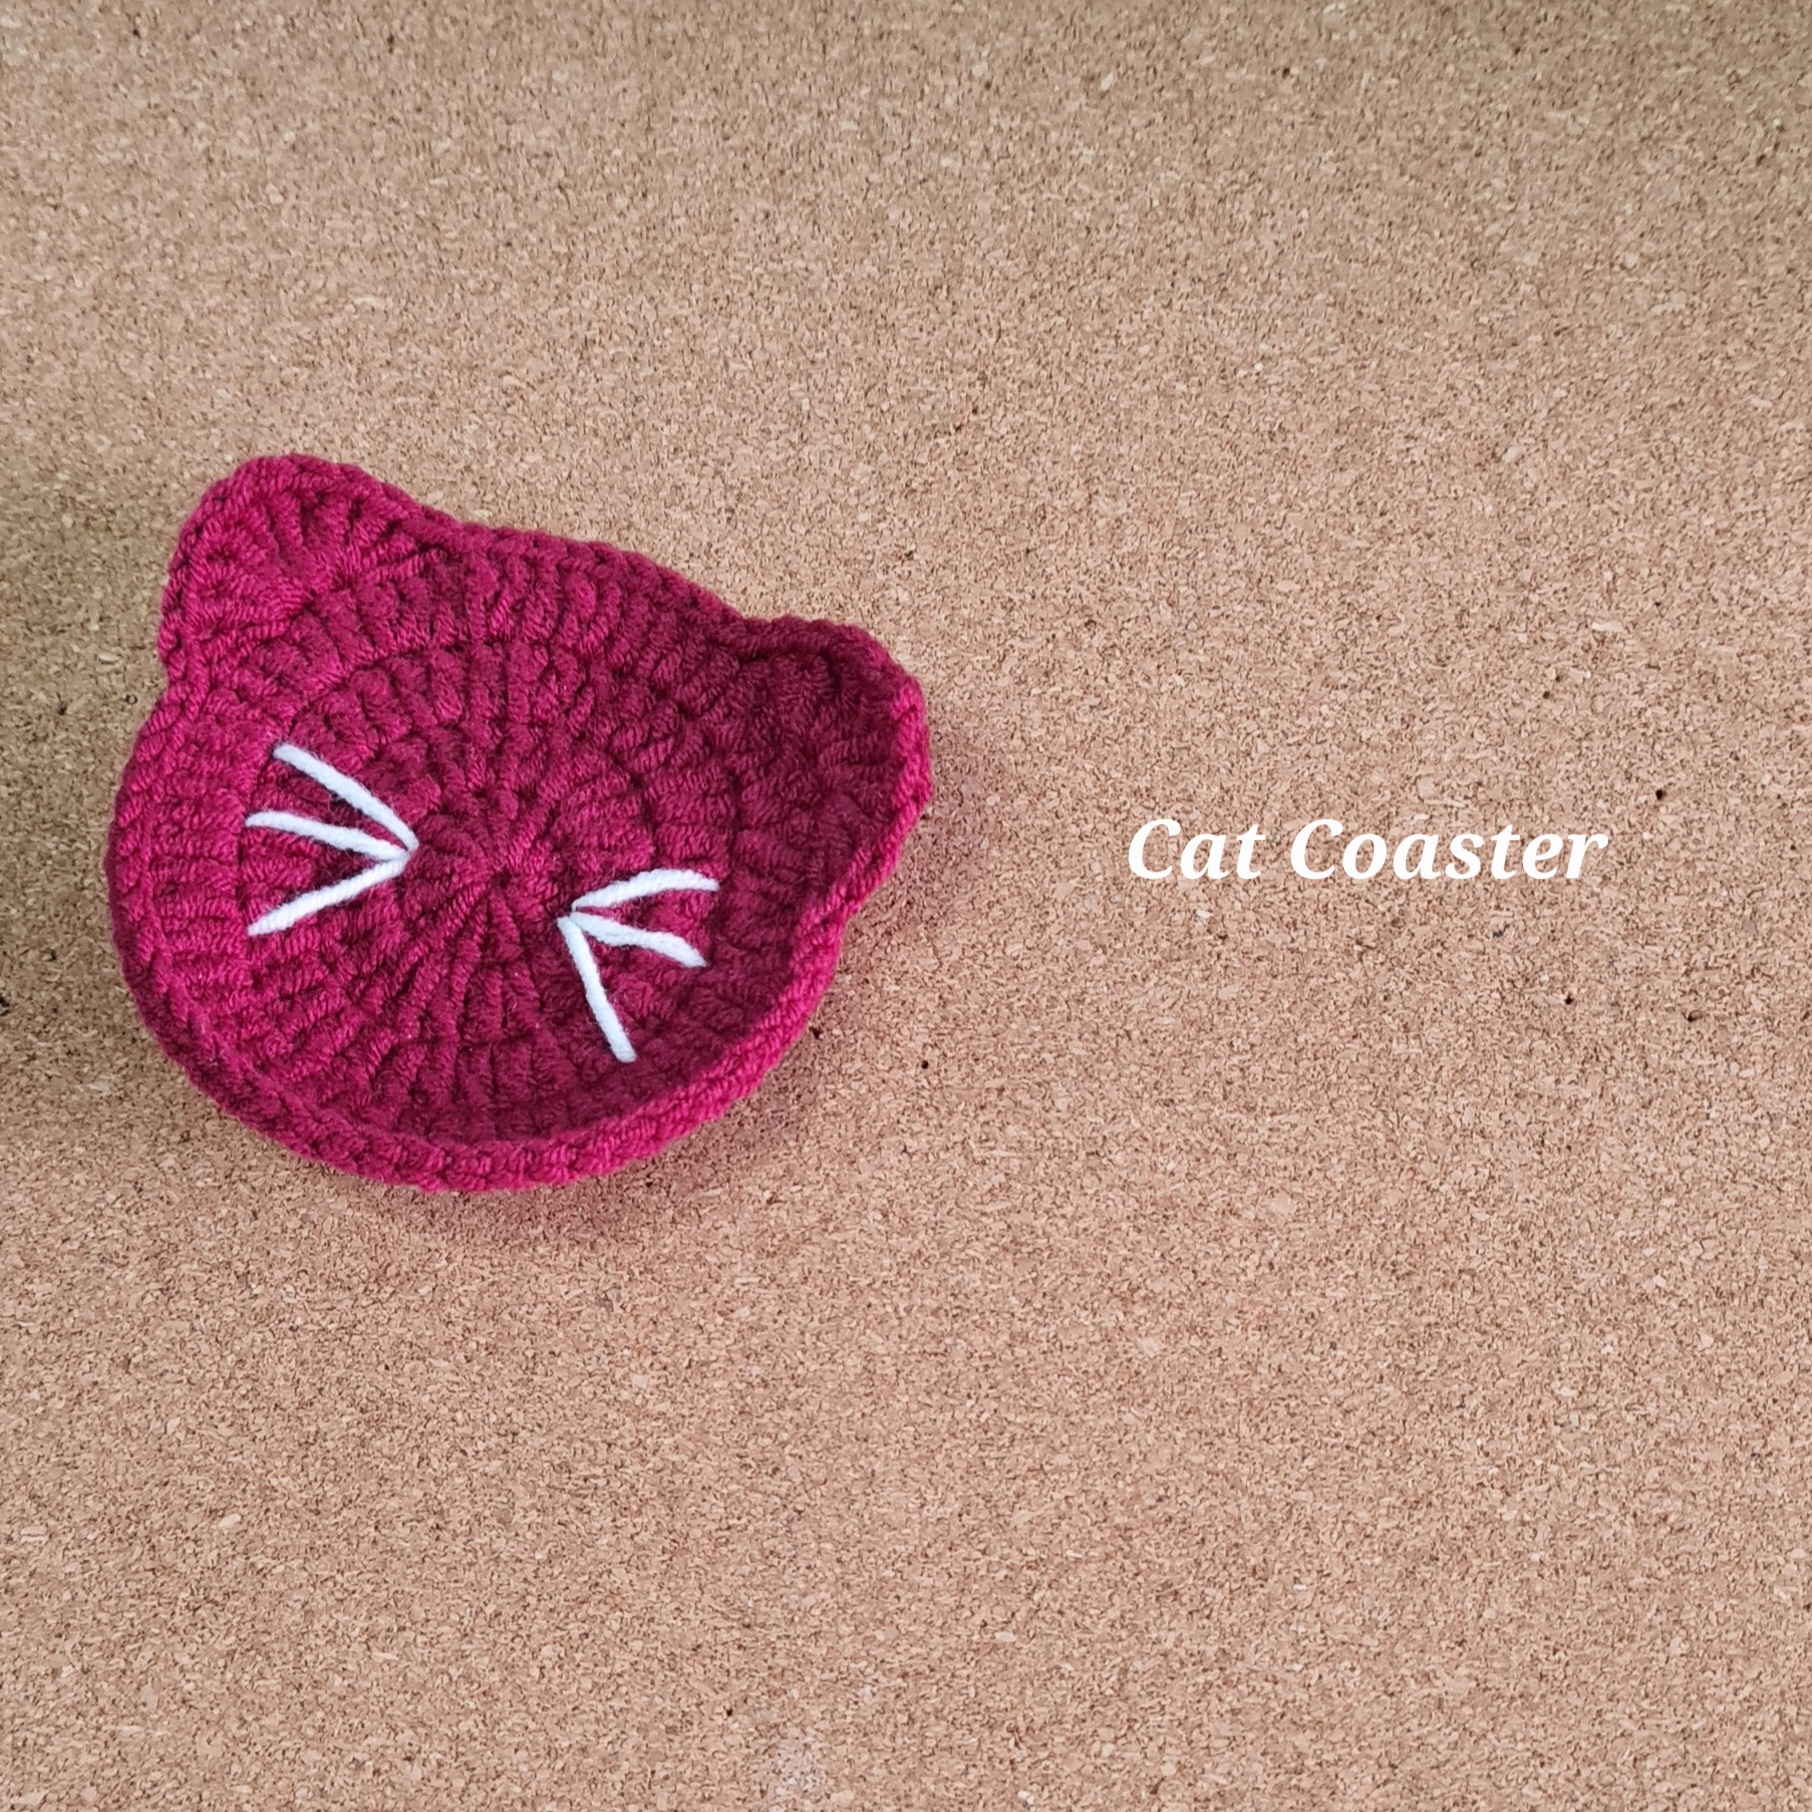 Learn how to crochet a cat coaster with Penny - Basic (钩针基础兴趣班-制作猫咪杯垫）